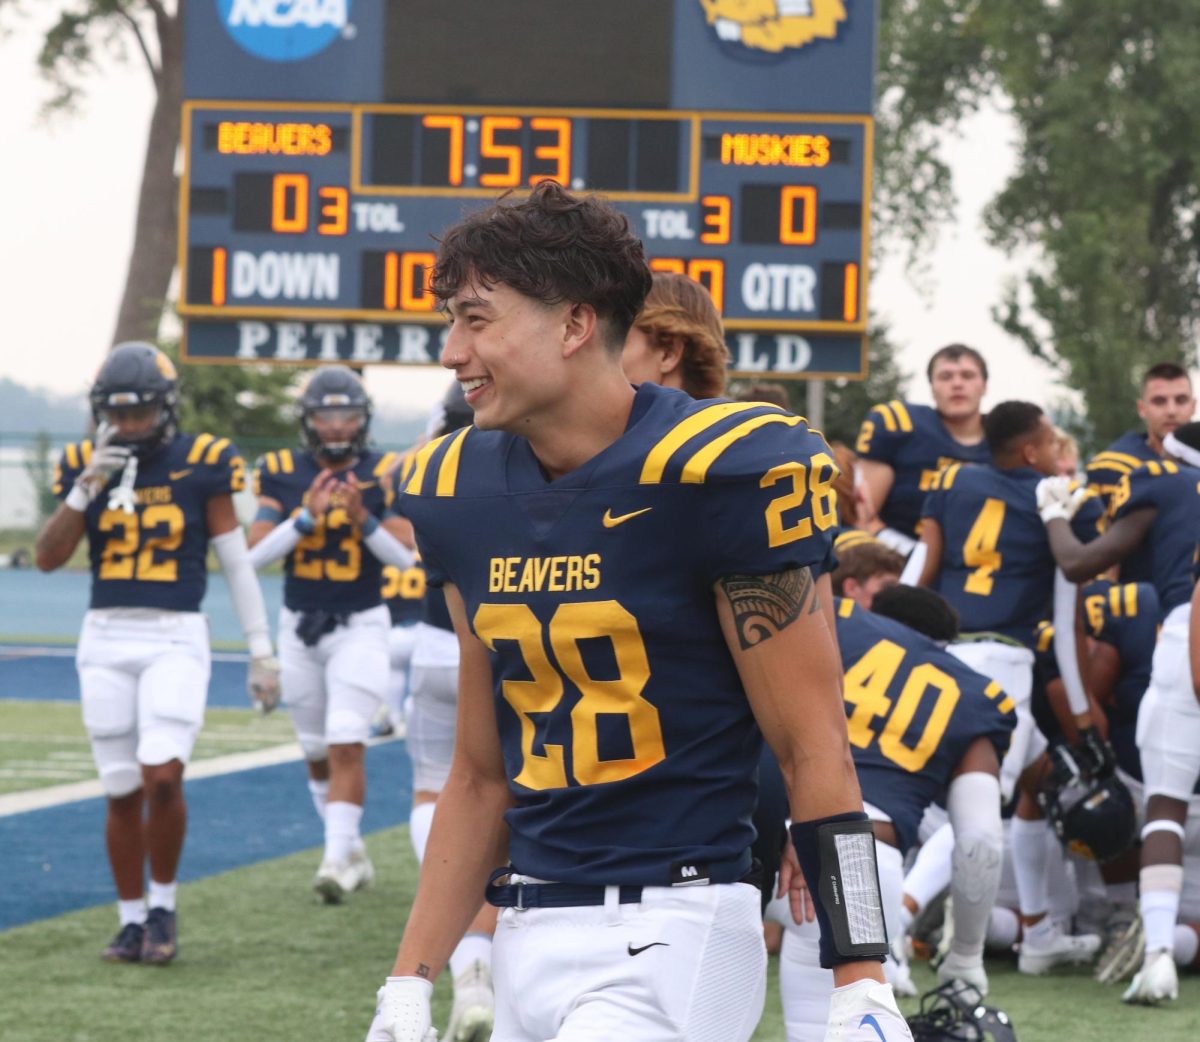 All smiles from Sophomore Running Back Meven Obregon (#28) as the Beavers prepare to take on the Lakeland Muskies.